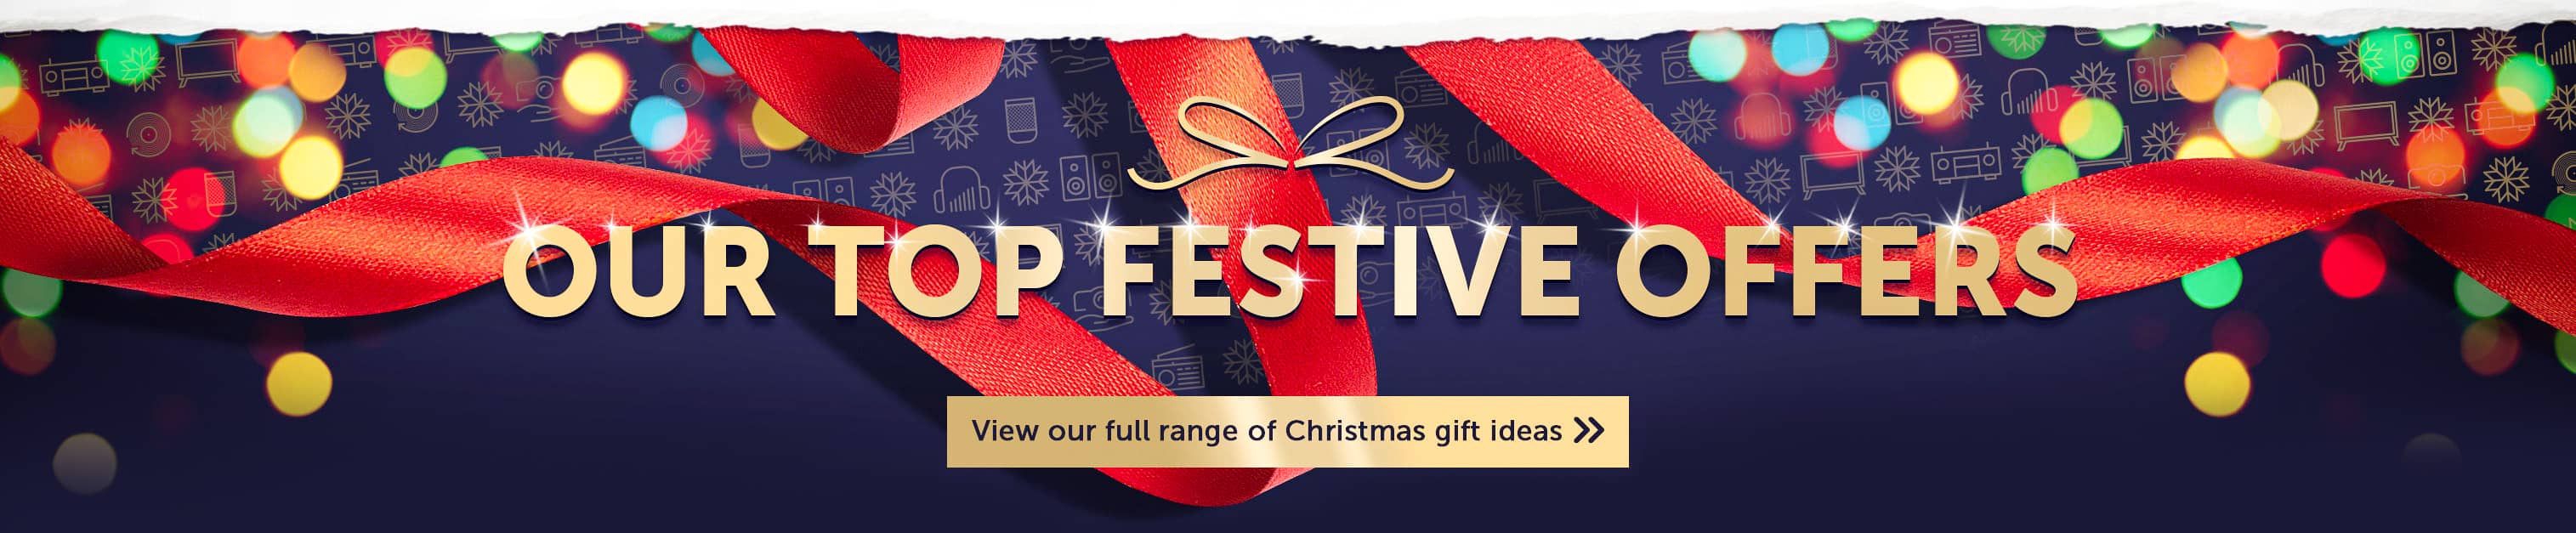 Our top festive offers